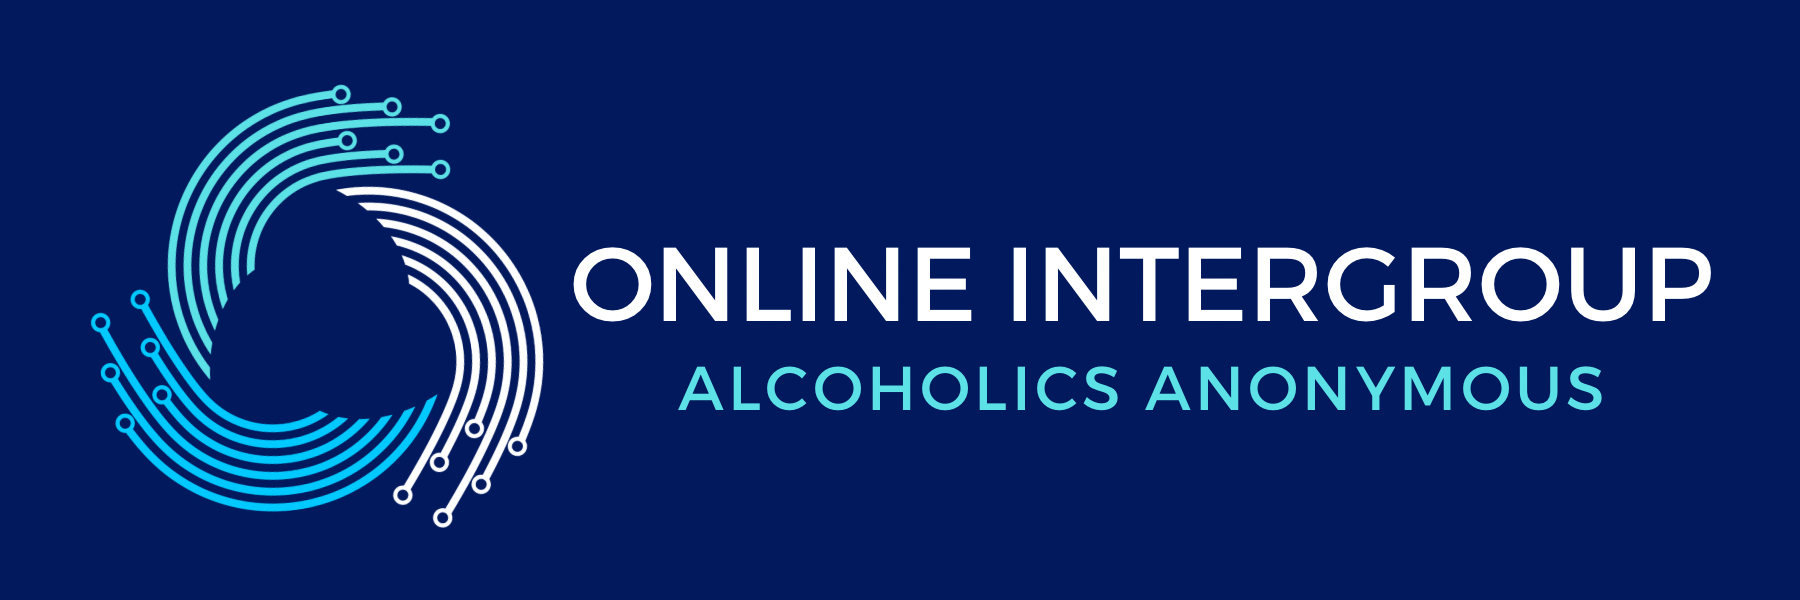 Online Intergroup of Alcoholics Anonymous